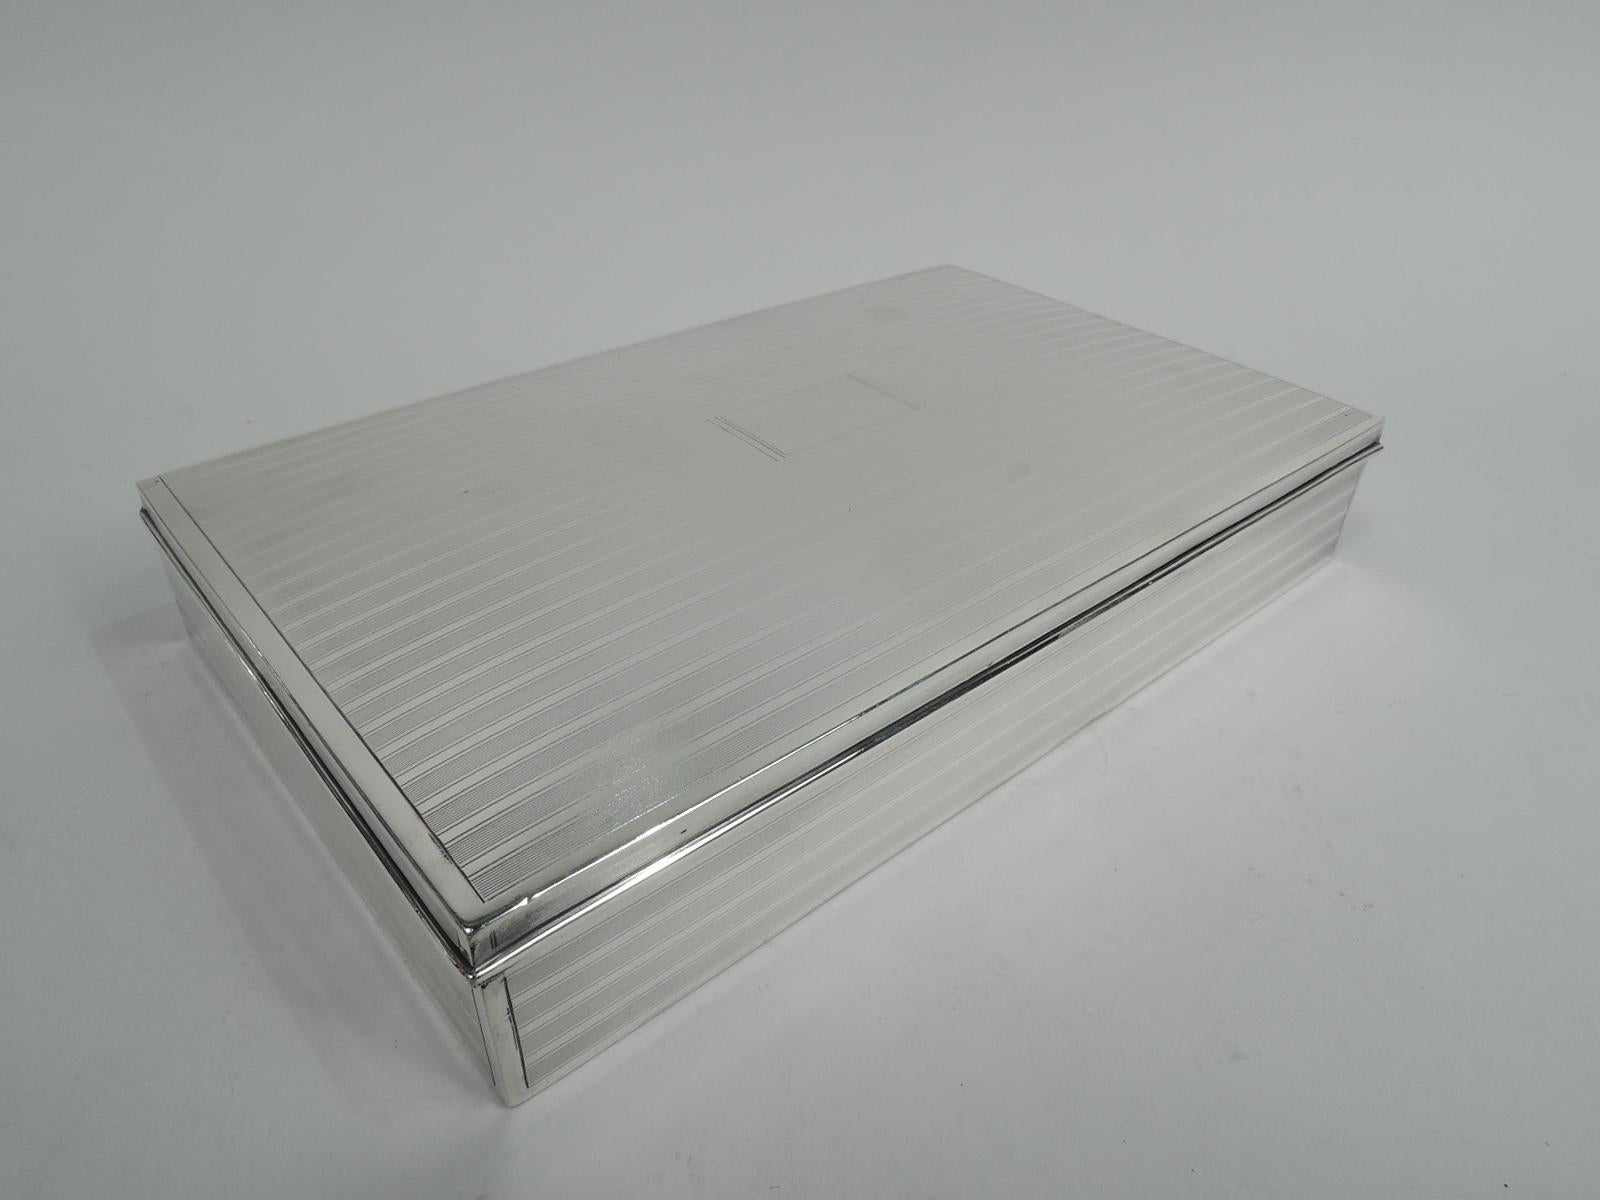 Large Art Deco sterling silver box. Made by Tiffany & Co. in New York, ca 1913. Rectangular with straight sides. Cover hinged with gently curved top. Engine-turned horizontal lines in plain frames on sides and cover. Cover top has plain central